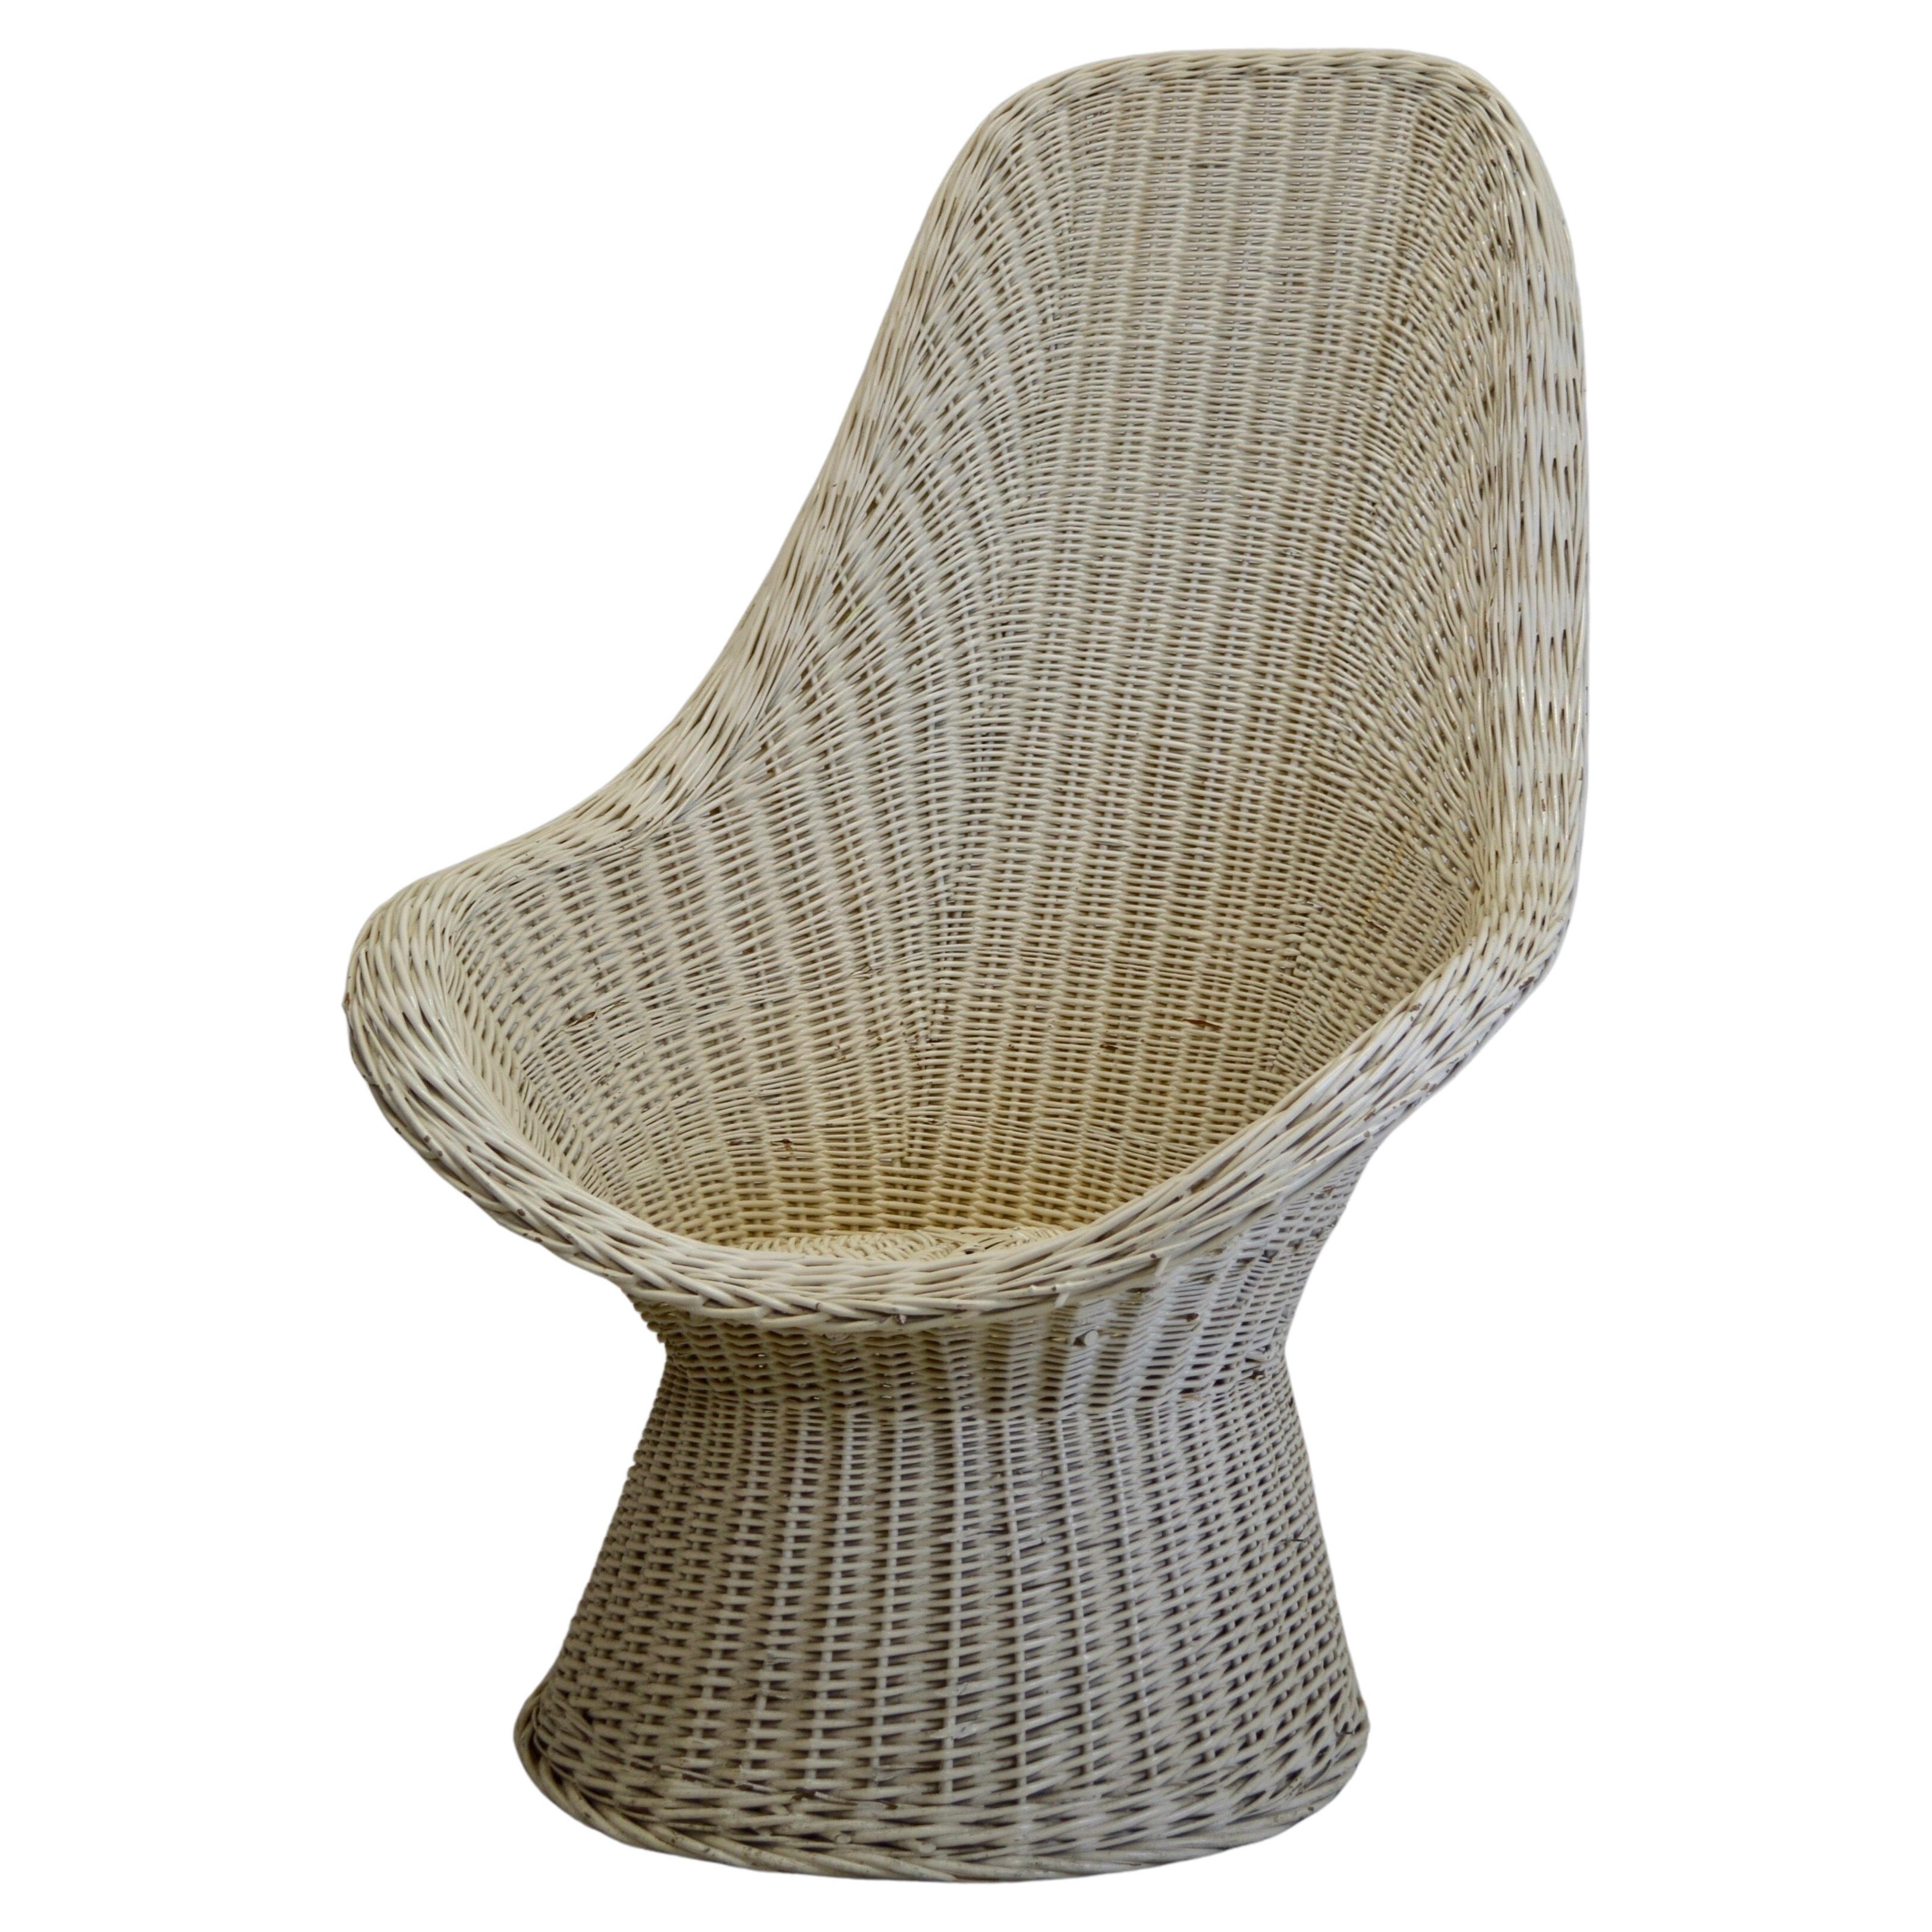 A woven rattan armchair, white lacquered - France - 1960.